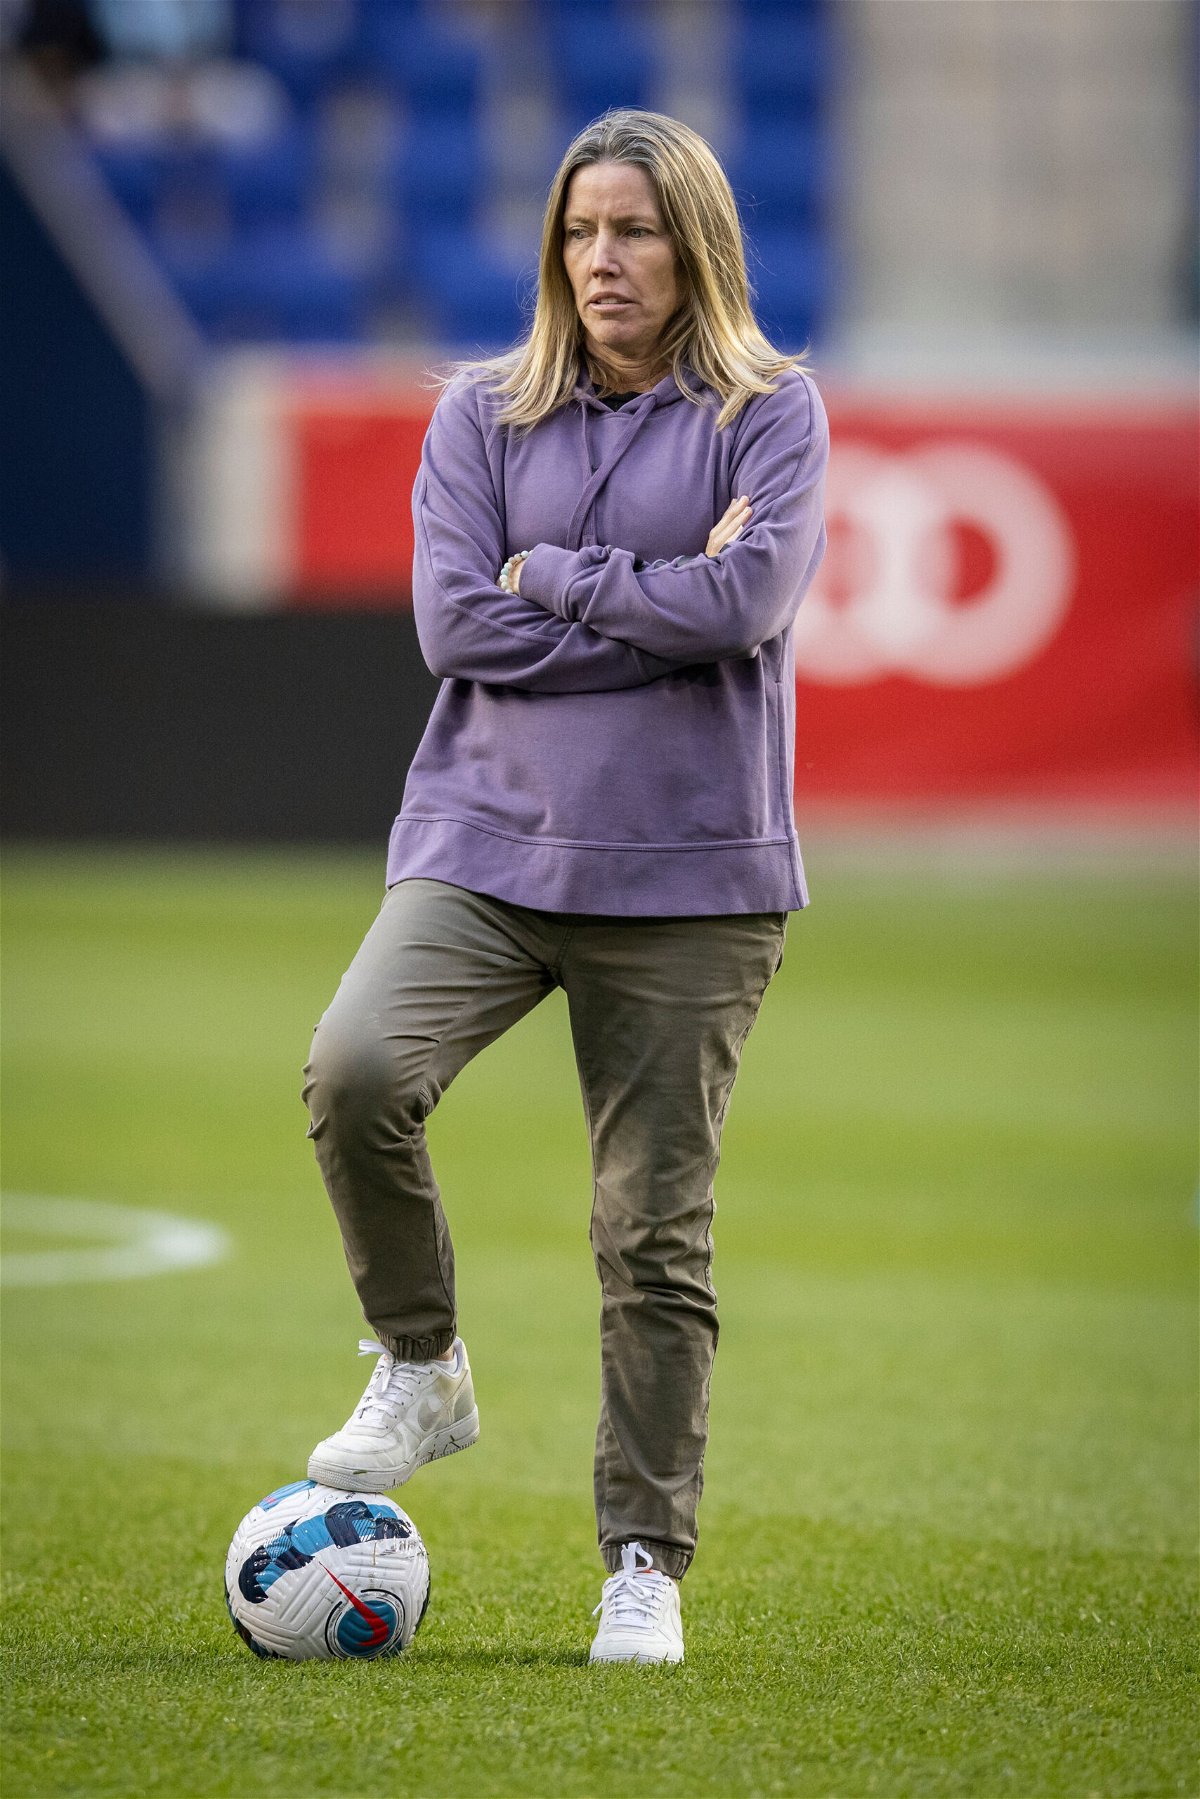 <i>Ira L. Black/Corbis/Getty Images</i><br/>Orlando Pride head coach Amanda Cromwell has been placed on administrative leave during an investigation into allegations of retaliation.